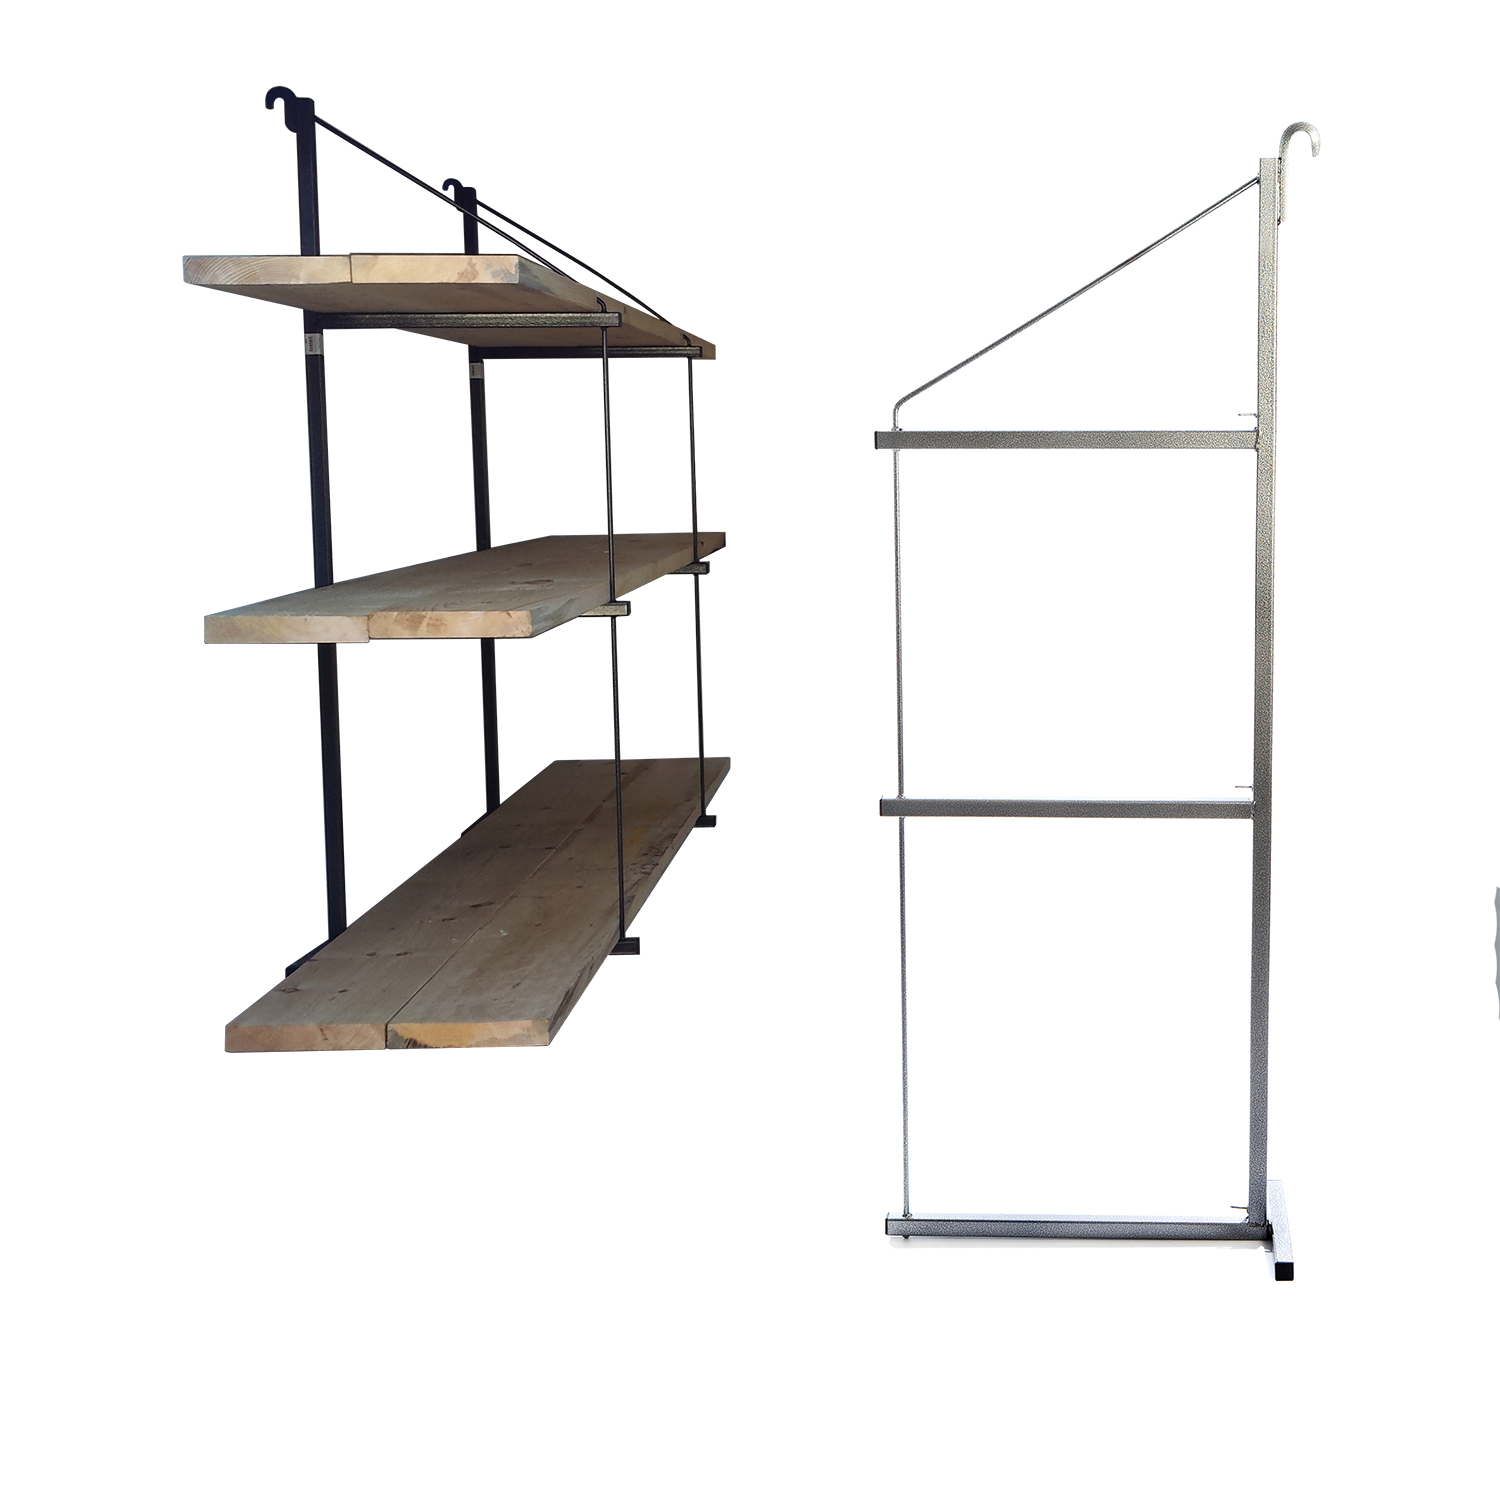 Instant Shipping Container Shelving Brackets (3 Pack) (DOES NOT SHIP TO USA)